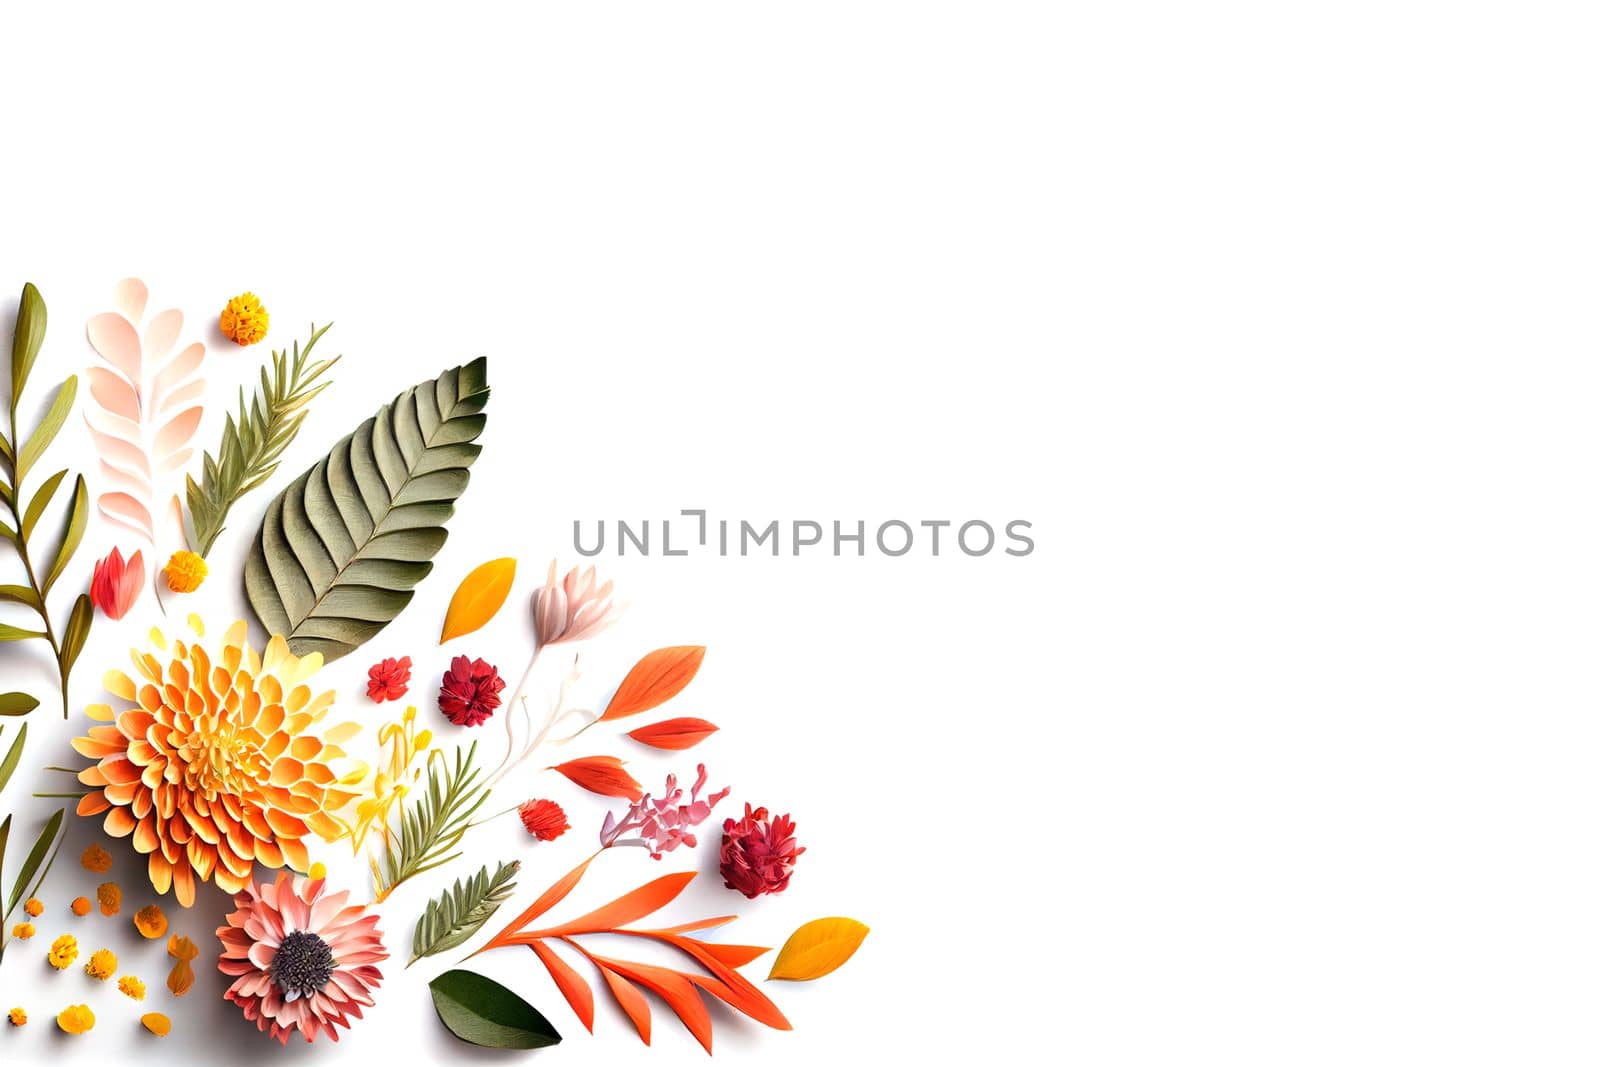 Composition of flowers. Frame pattern made from different dried flowers and leaves on white background. Flat lay, top view, copy space